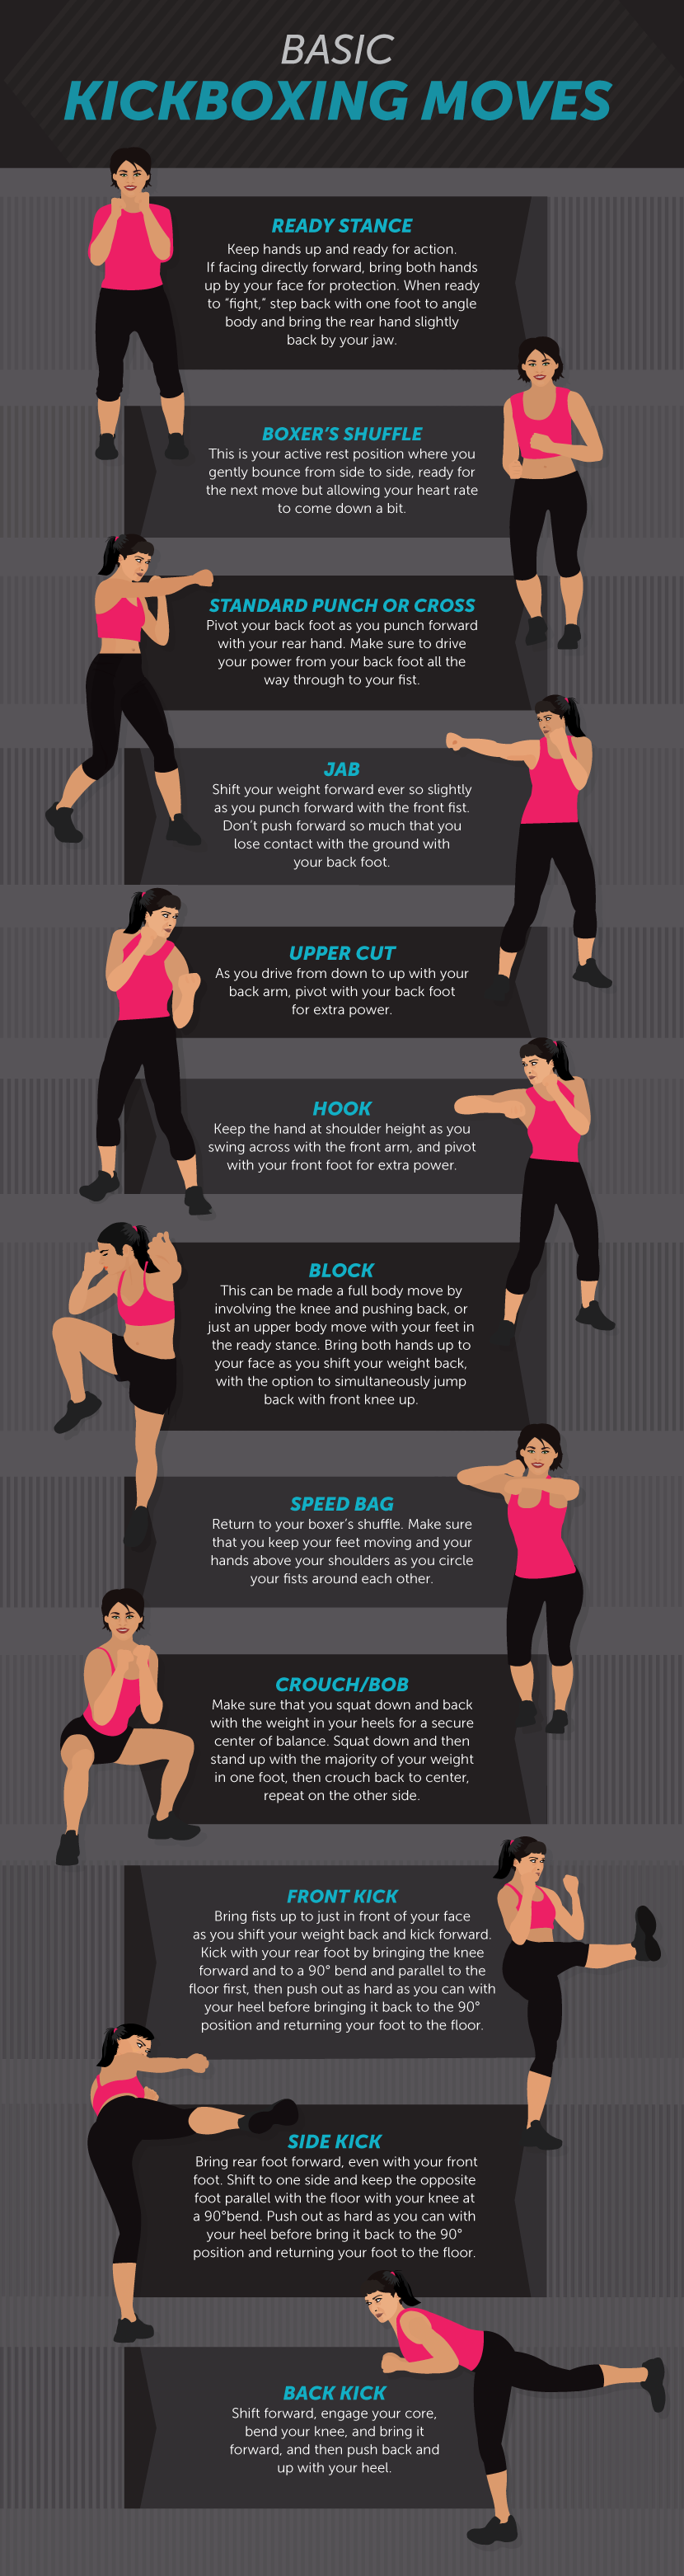 Basic Kickboxing Moves - Kickboxing Your Way to a New You!